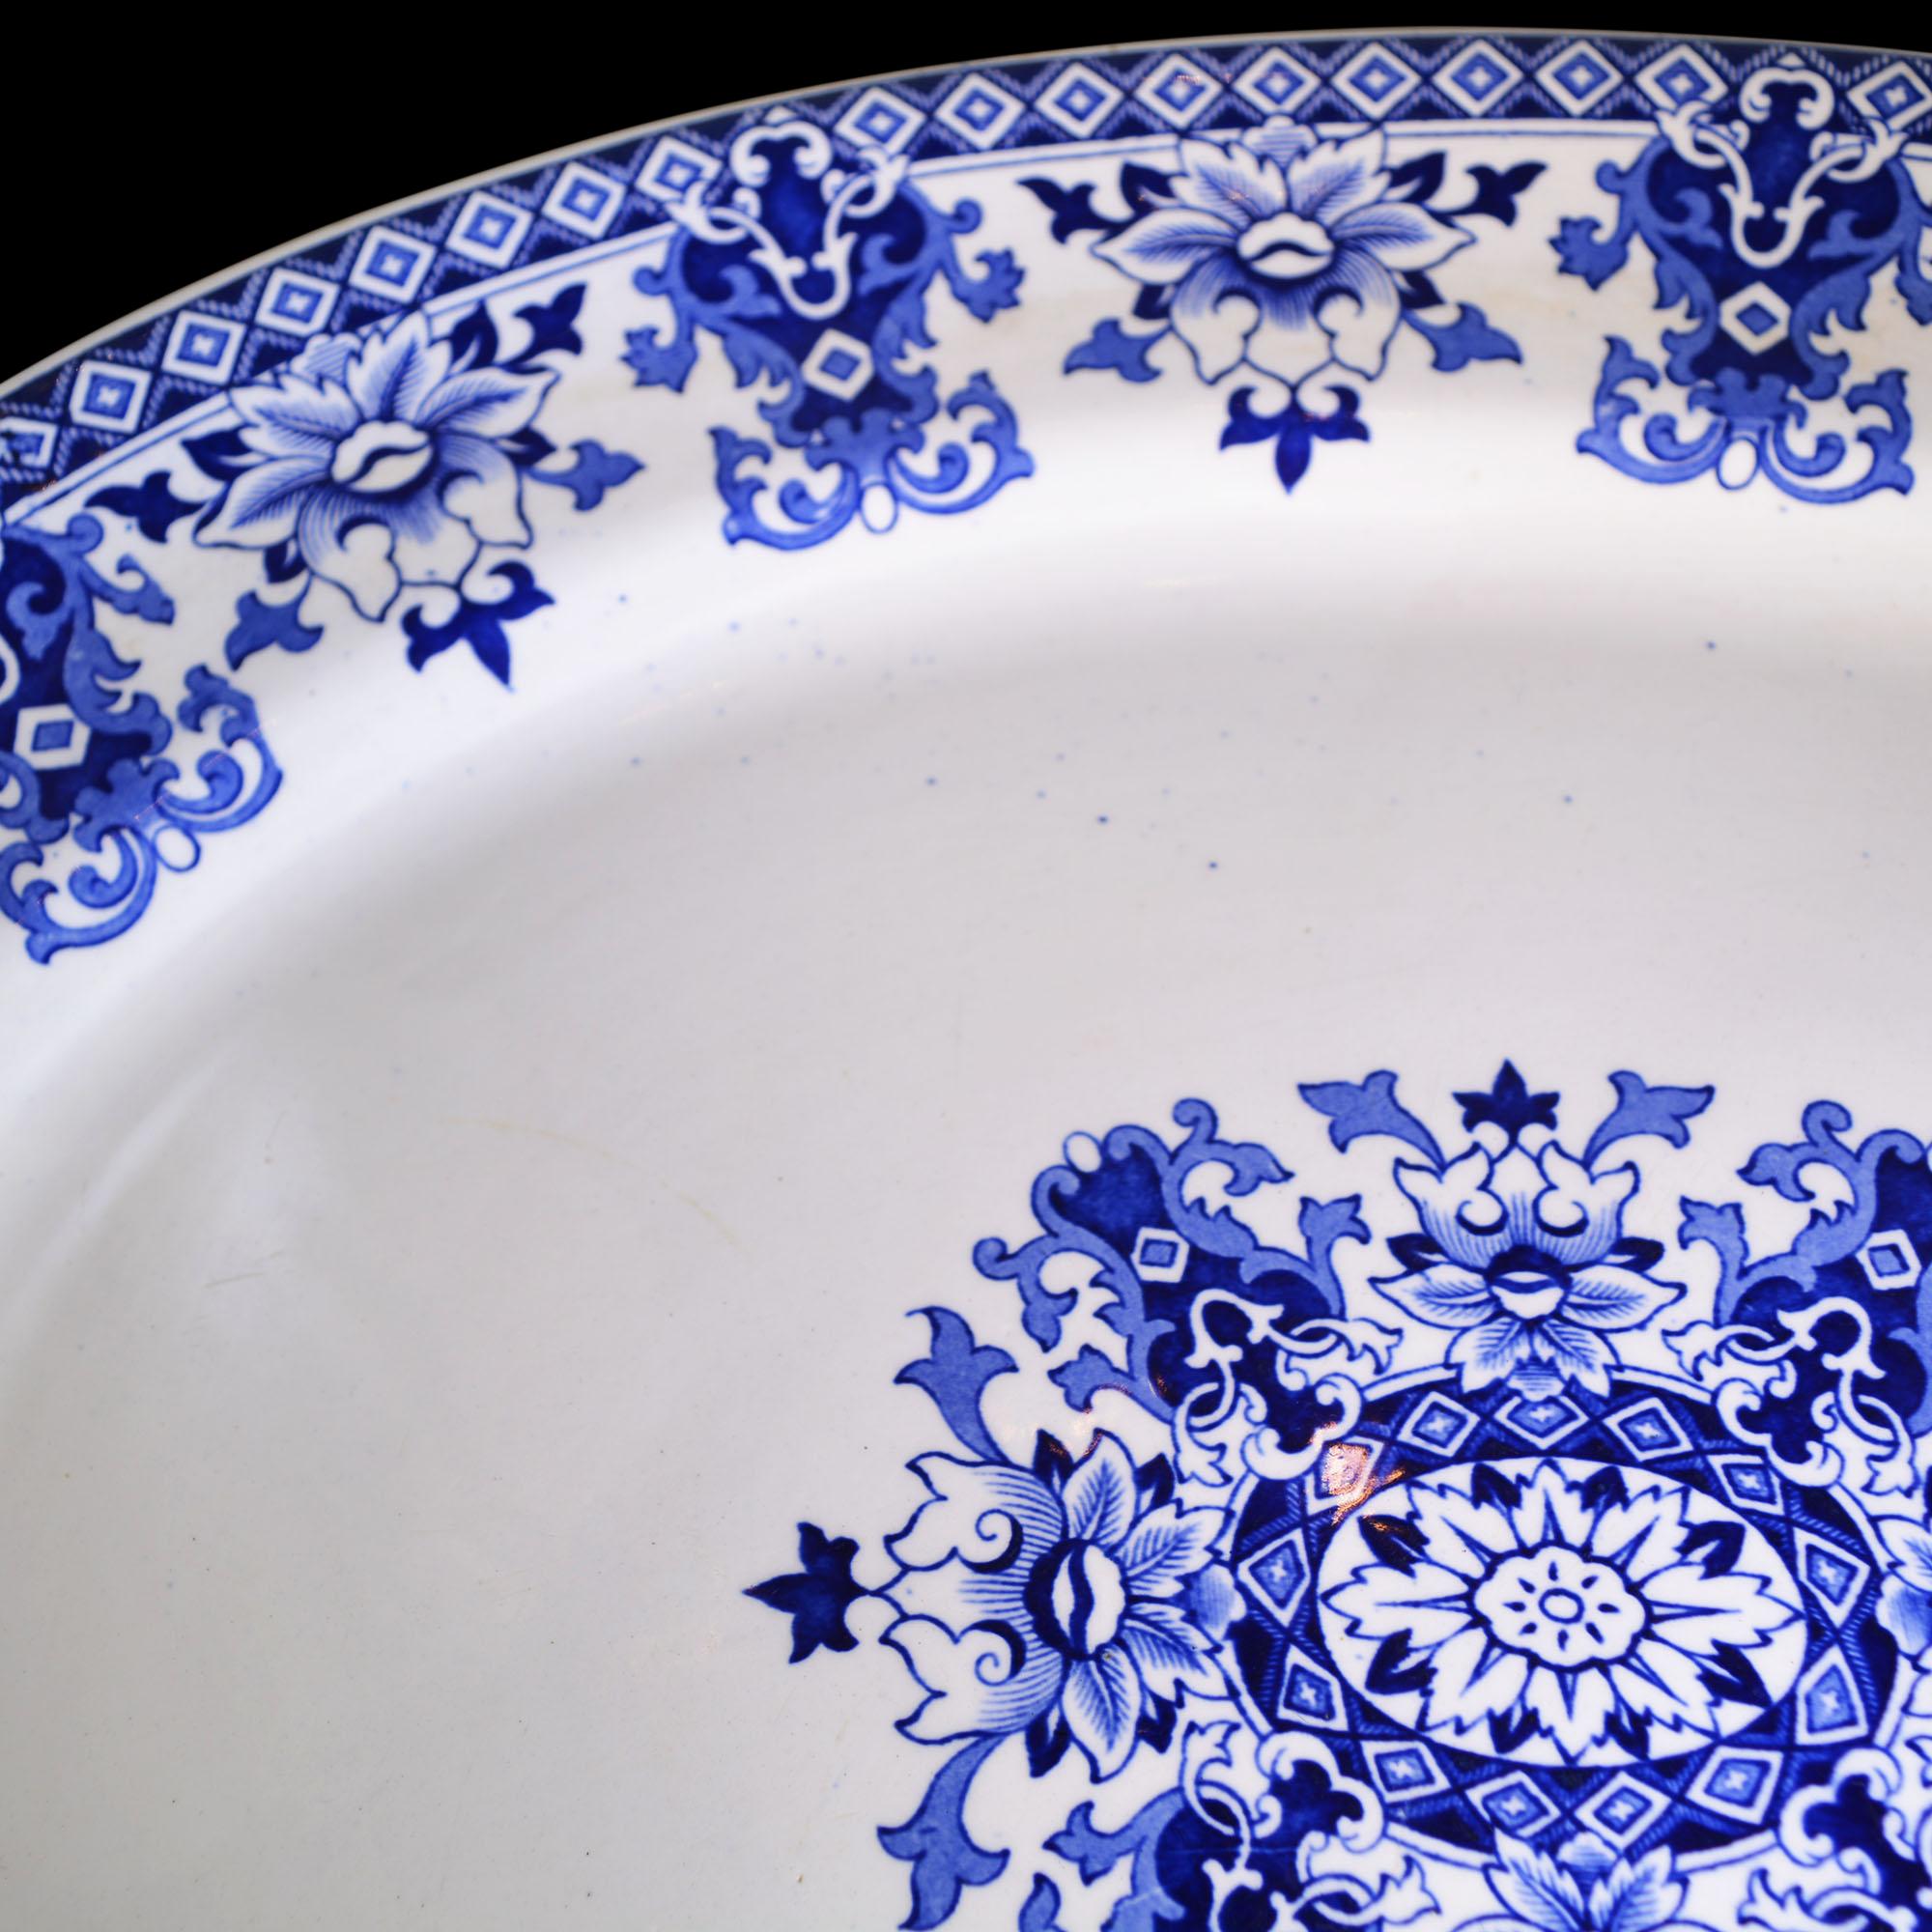 This large platter has the Classic blue and white Lolanthe design. The manufacturer E.F.B & Son is stamped on the back along with the imprint. The platter has an intricate floral center design with coordinating border design. The manufacturer,